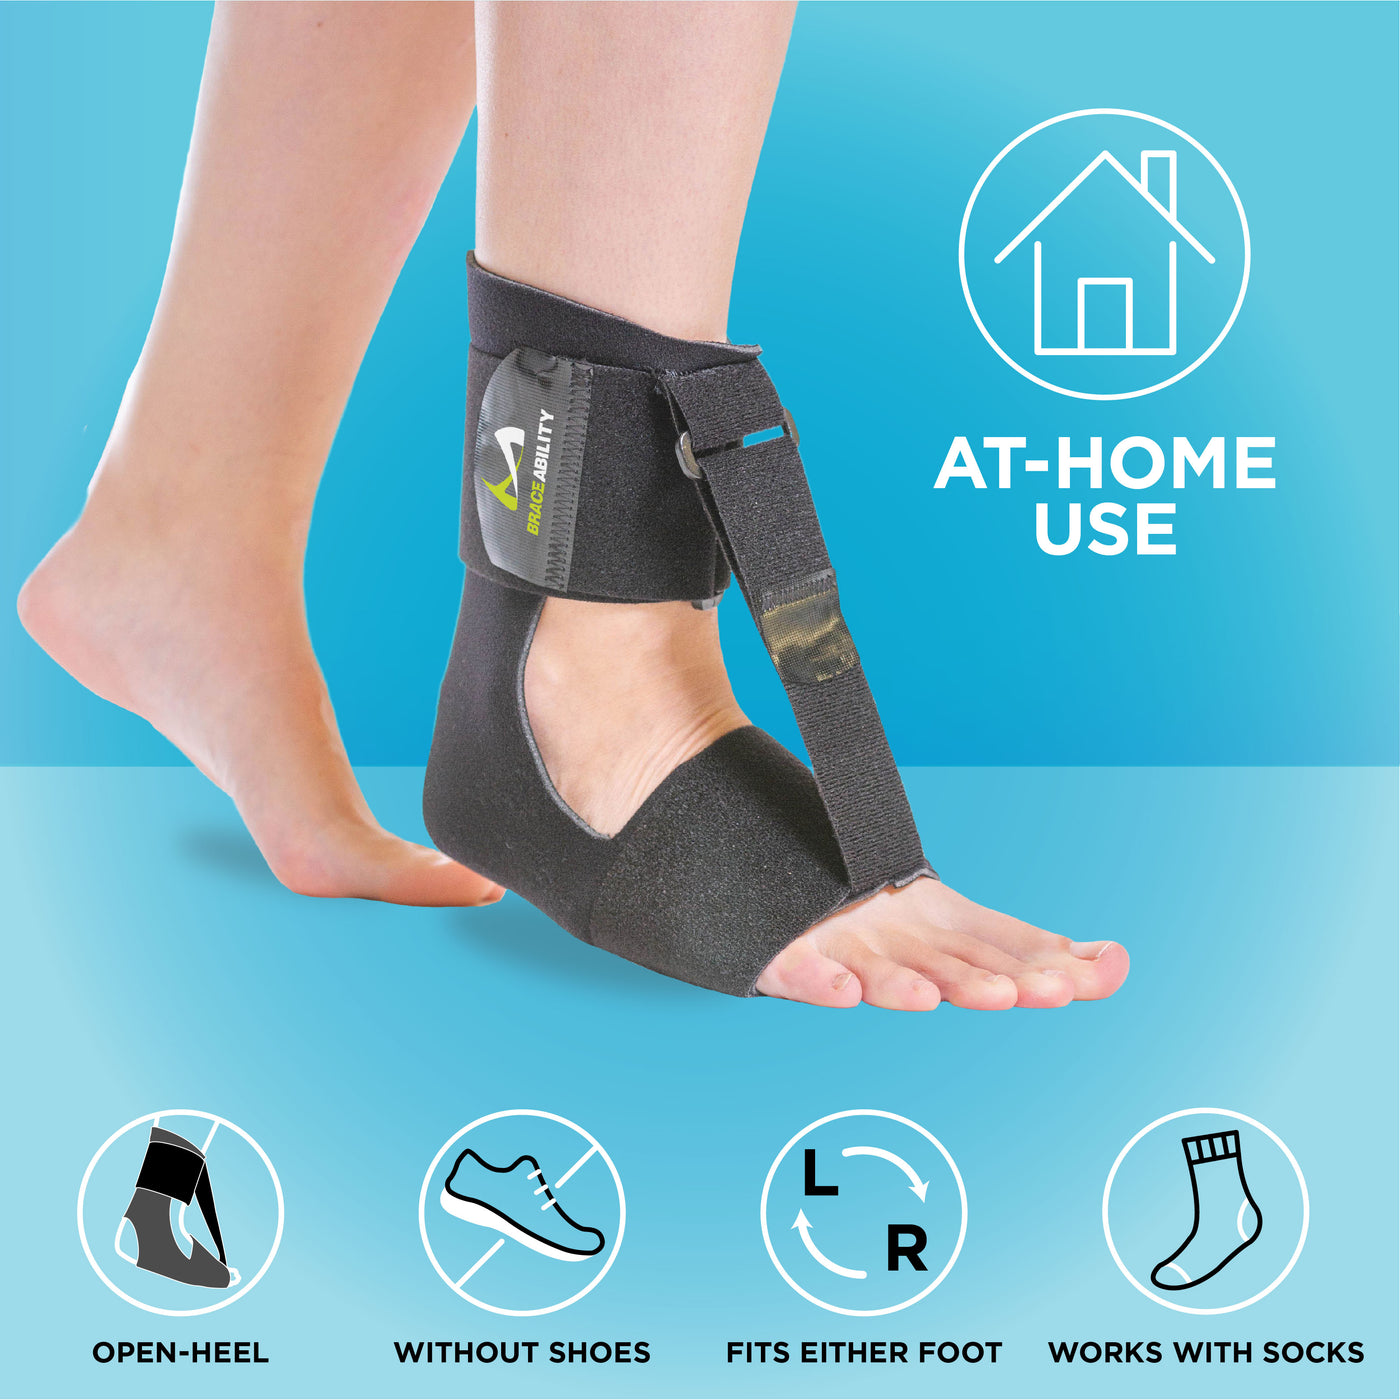 our soft afo drop foot support fits either foot and should be worn without shoes